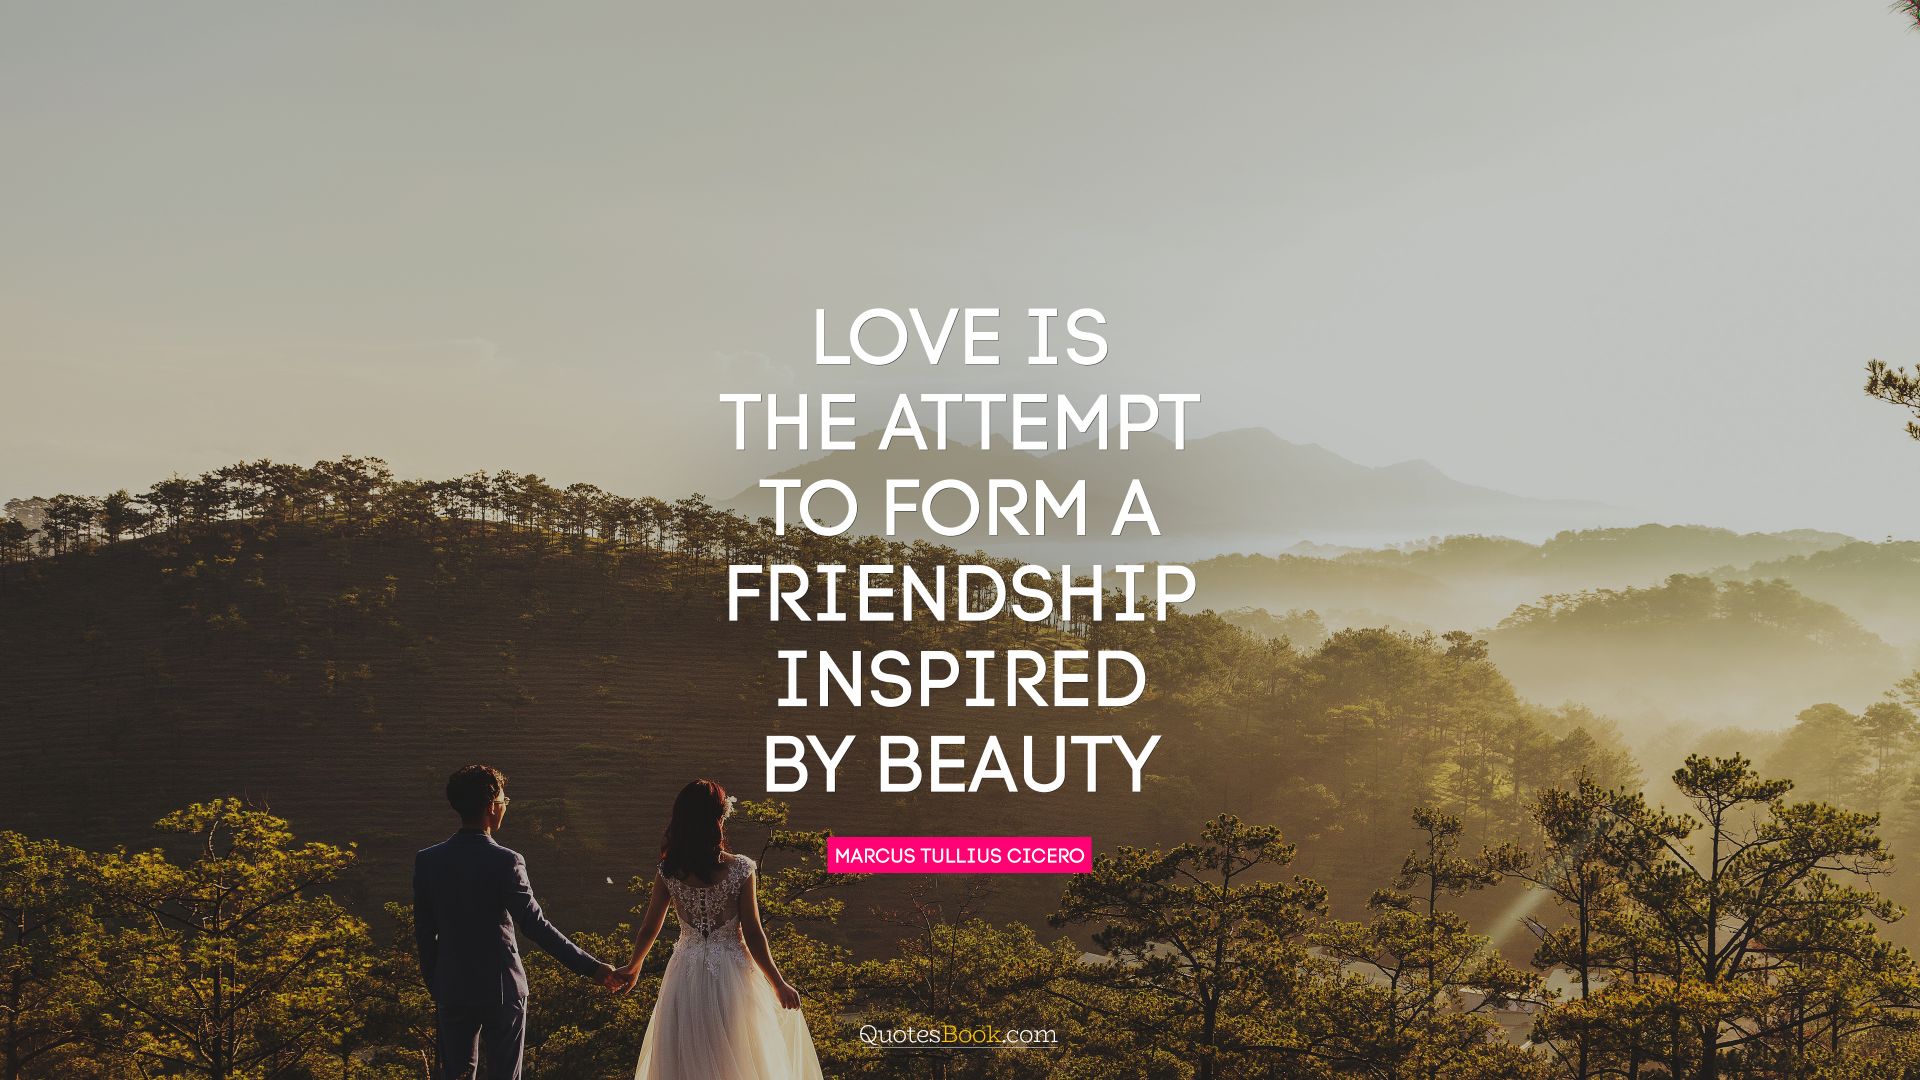 Love is the attempt to form a friendship inspired by beauty. - Quote by Marcus Tullius Cicero